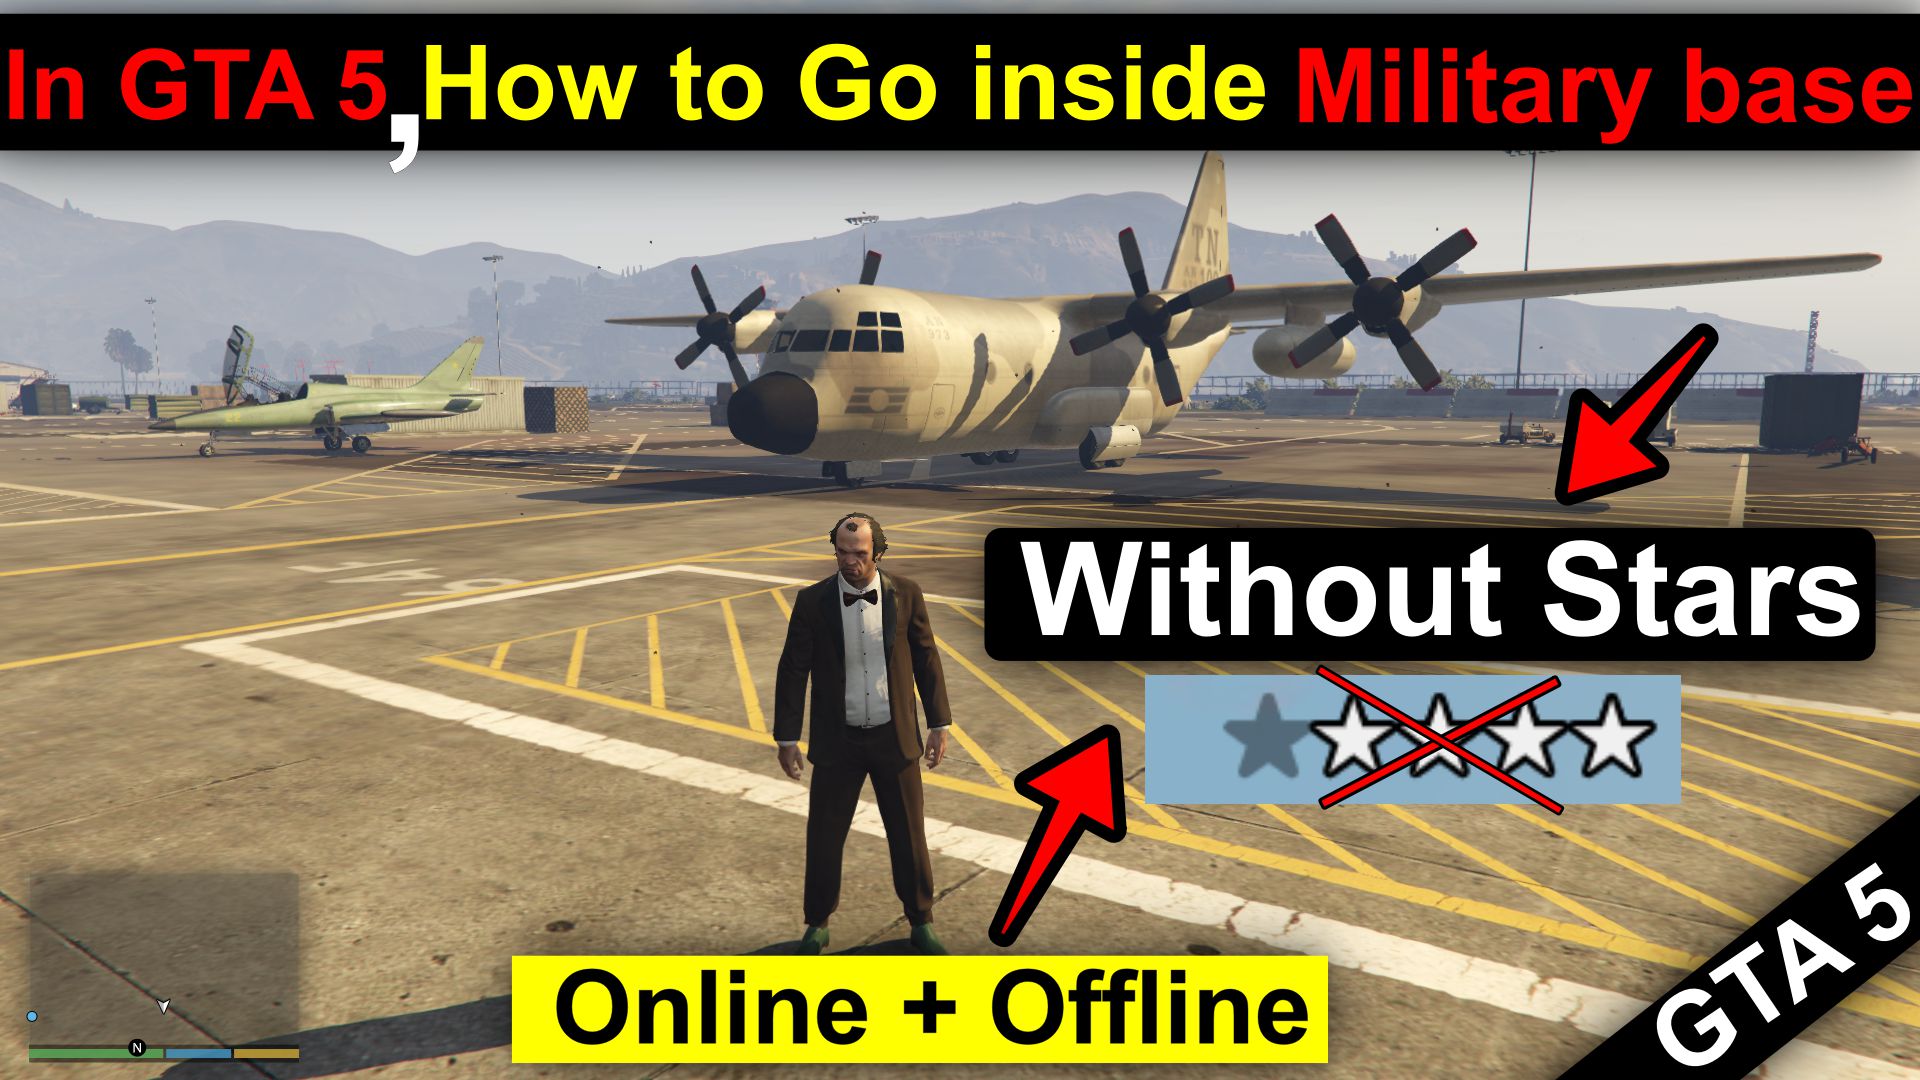 In GTA 5 how to go inside Military base without stars - GTA 5 offline + Online